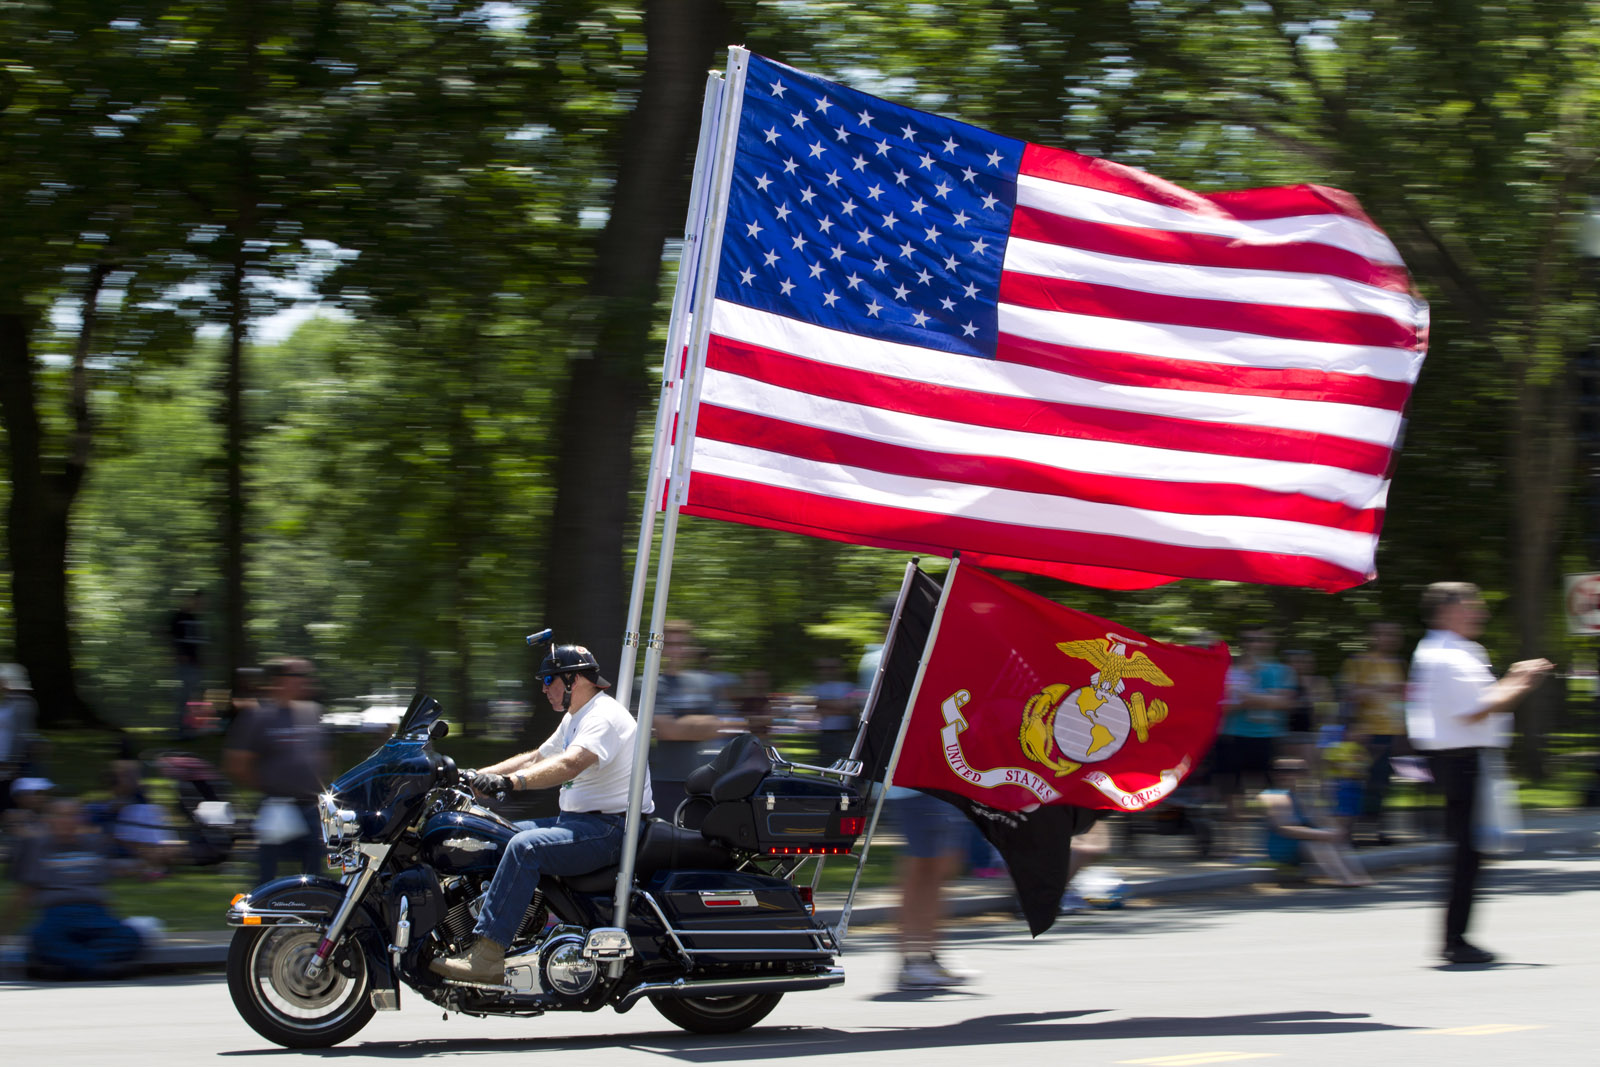 Participants in the Rolling Thunder annual motorcycle rally ride in the national mall during the annual parade ahead of Memorial Day in Washington, Sunday, May 24, 2015. (AP Photo/Jose Luis Magana)